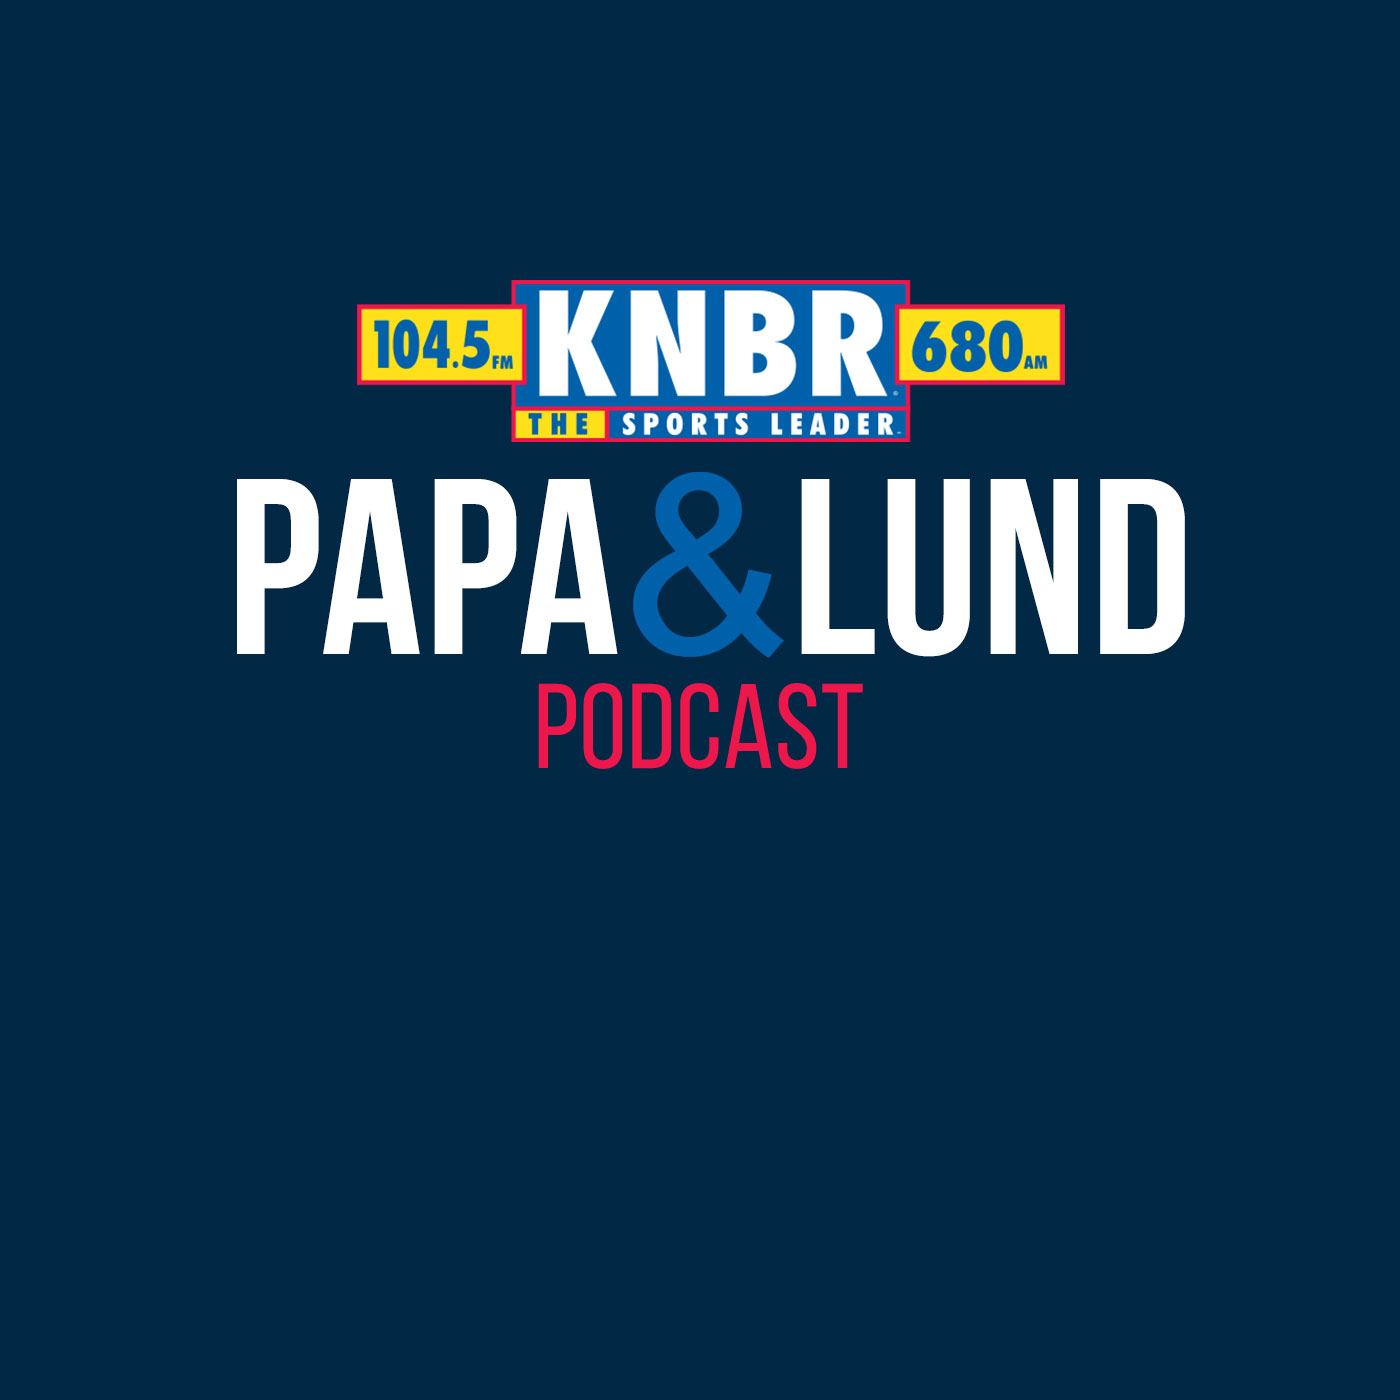 7-23 Andrew Baggarly joins P&L to breakdown the Giants Dodgers series and what the Giants could do at the trade deadline